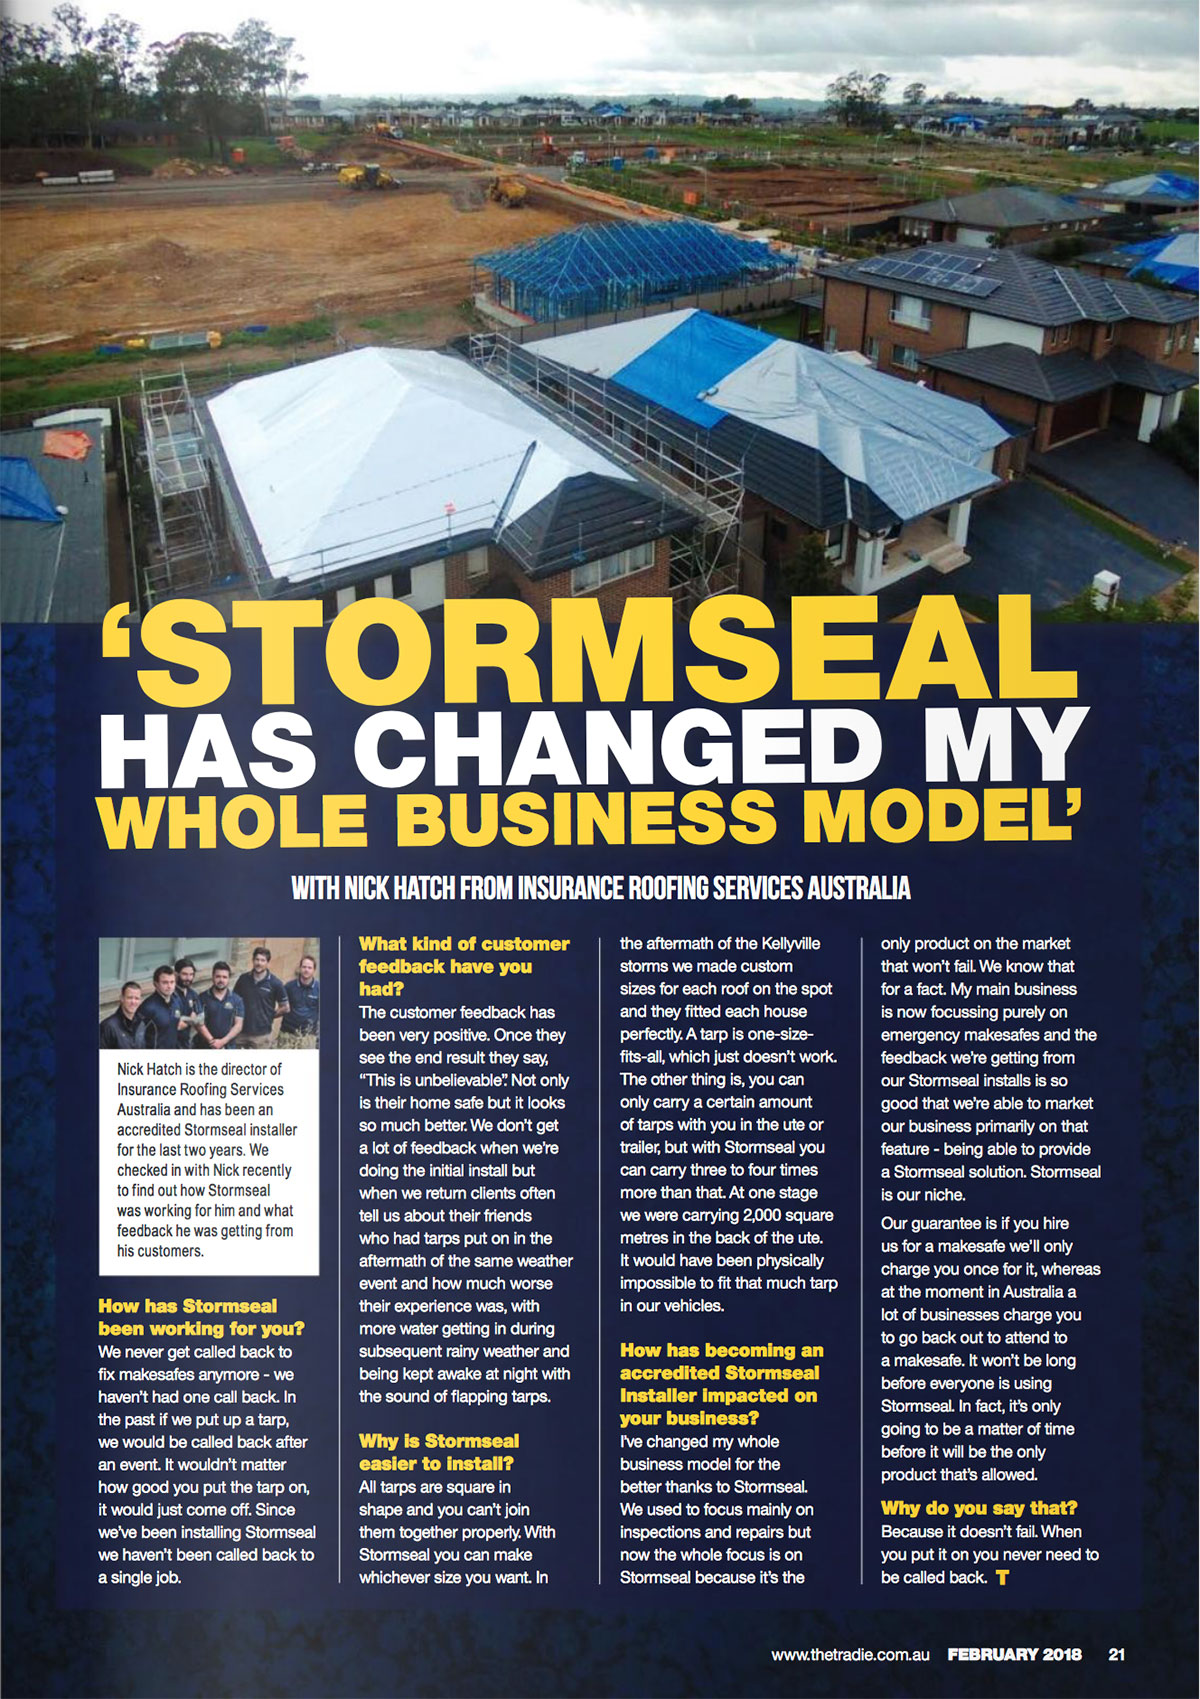 Stormseal has changed my whole business model